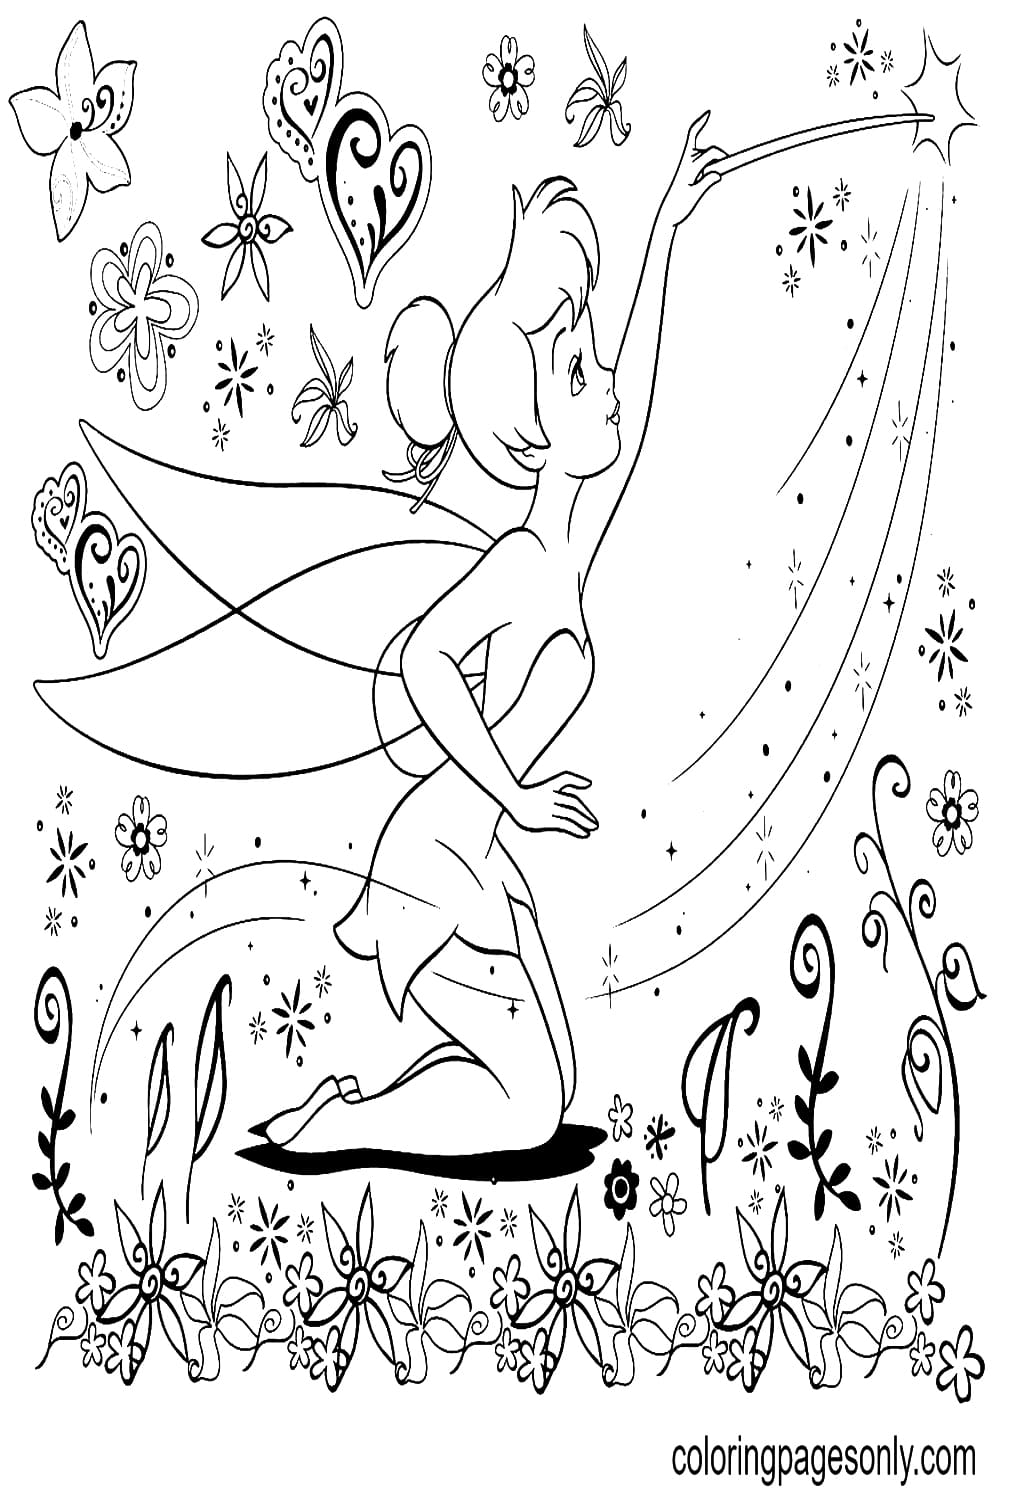 Tinkerbell Has A Magic Wand Coloring Pages